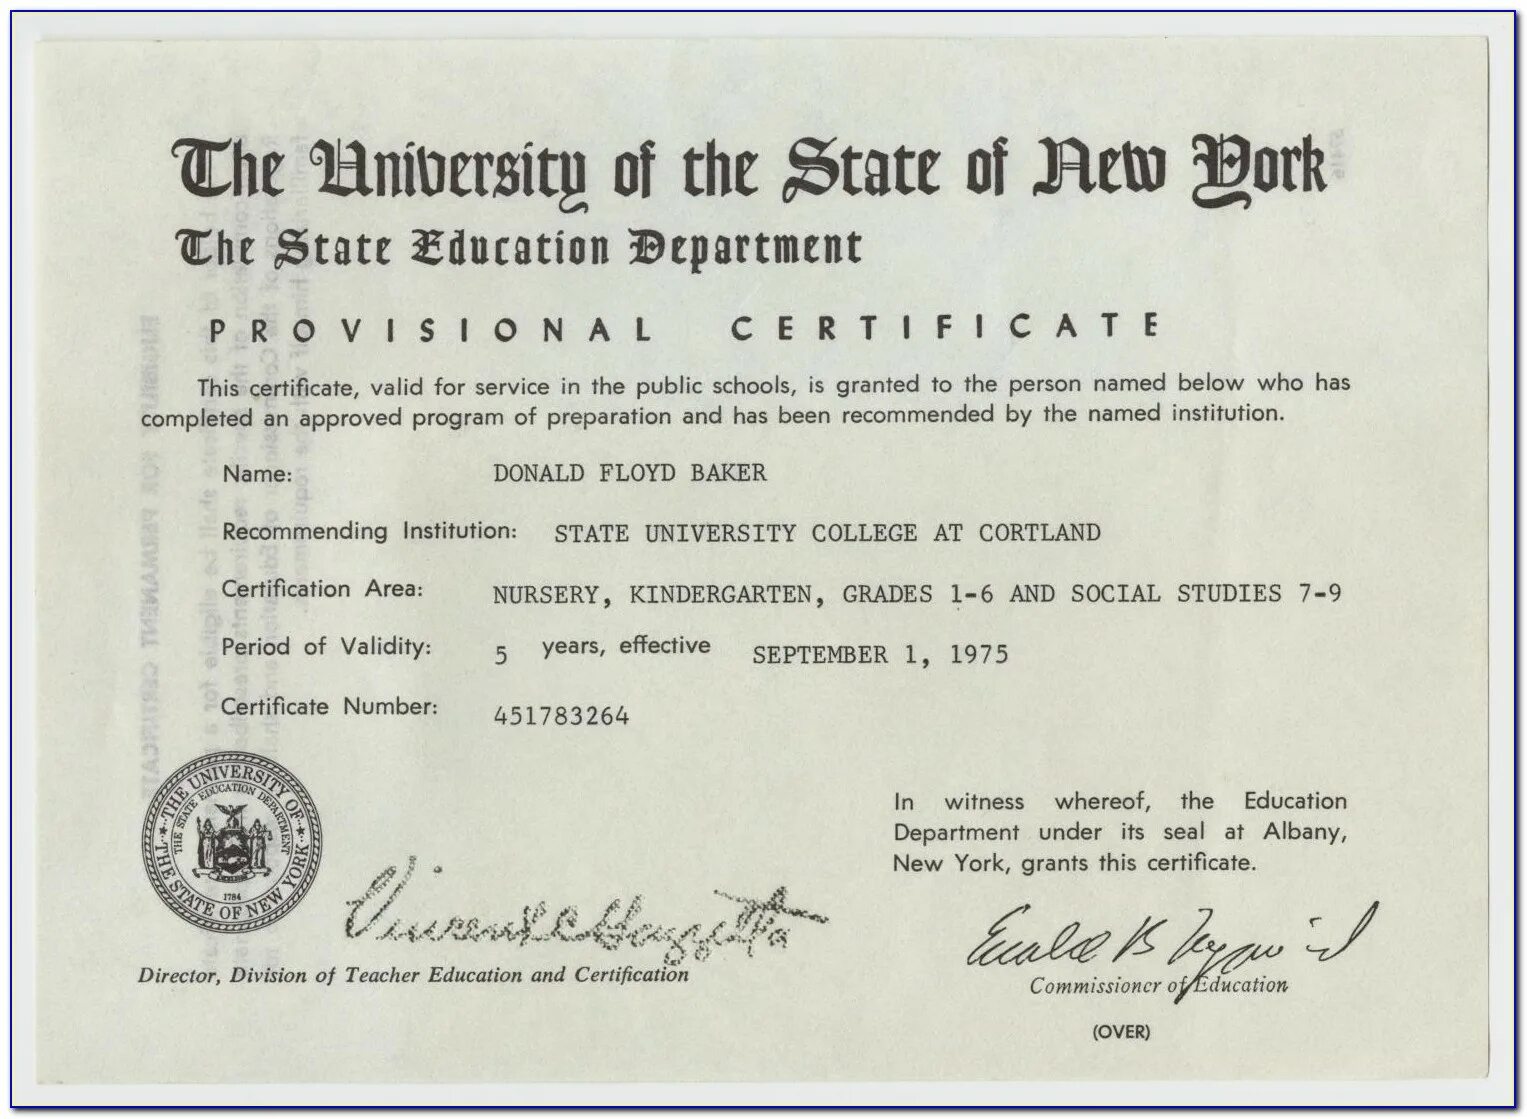 New York State Education Department. Provisional Certificate. New-York City Certificate. Certificate of Education. Sec certificate